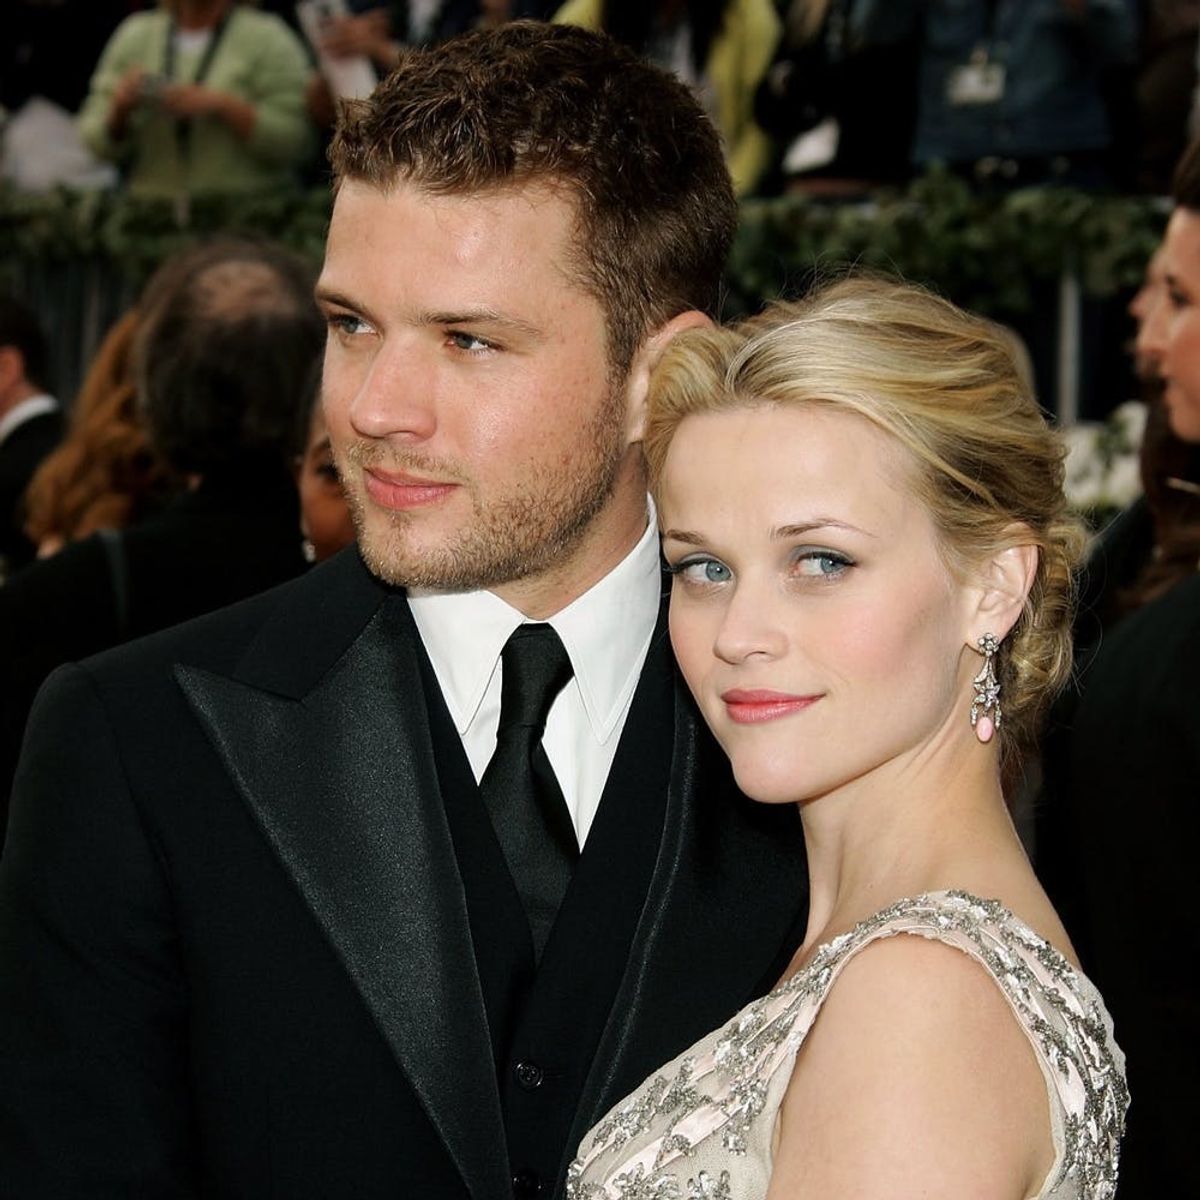 Reese Witherspoon Reflects on Getting Married at Age 23 to Ryan Phillippe